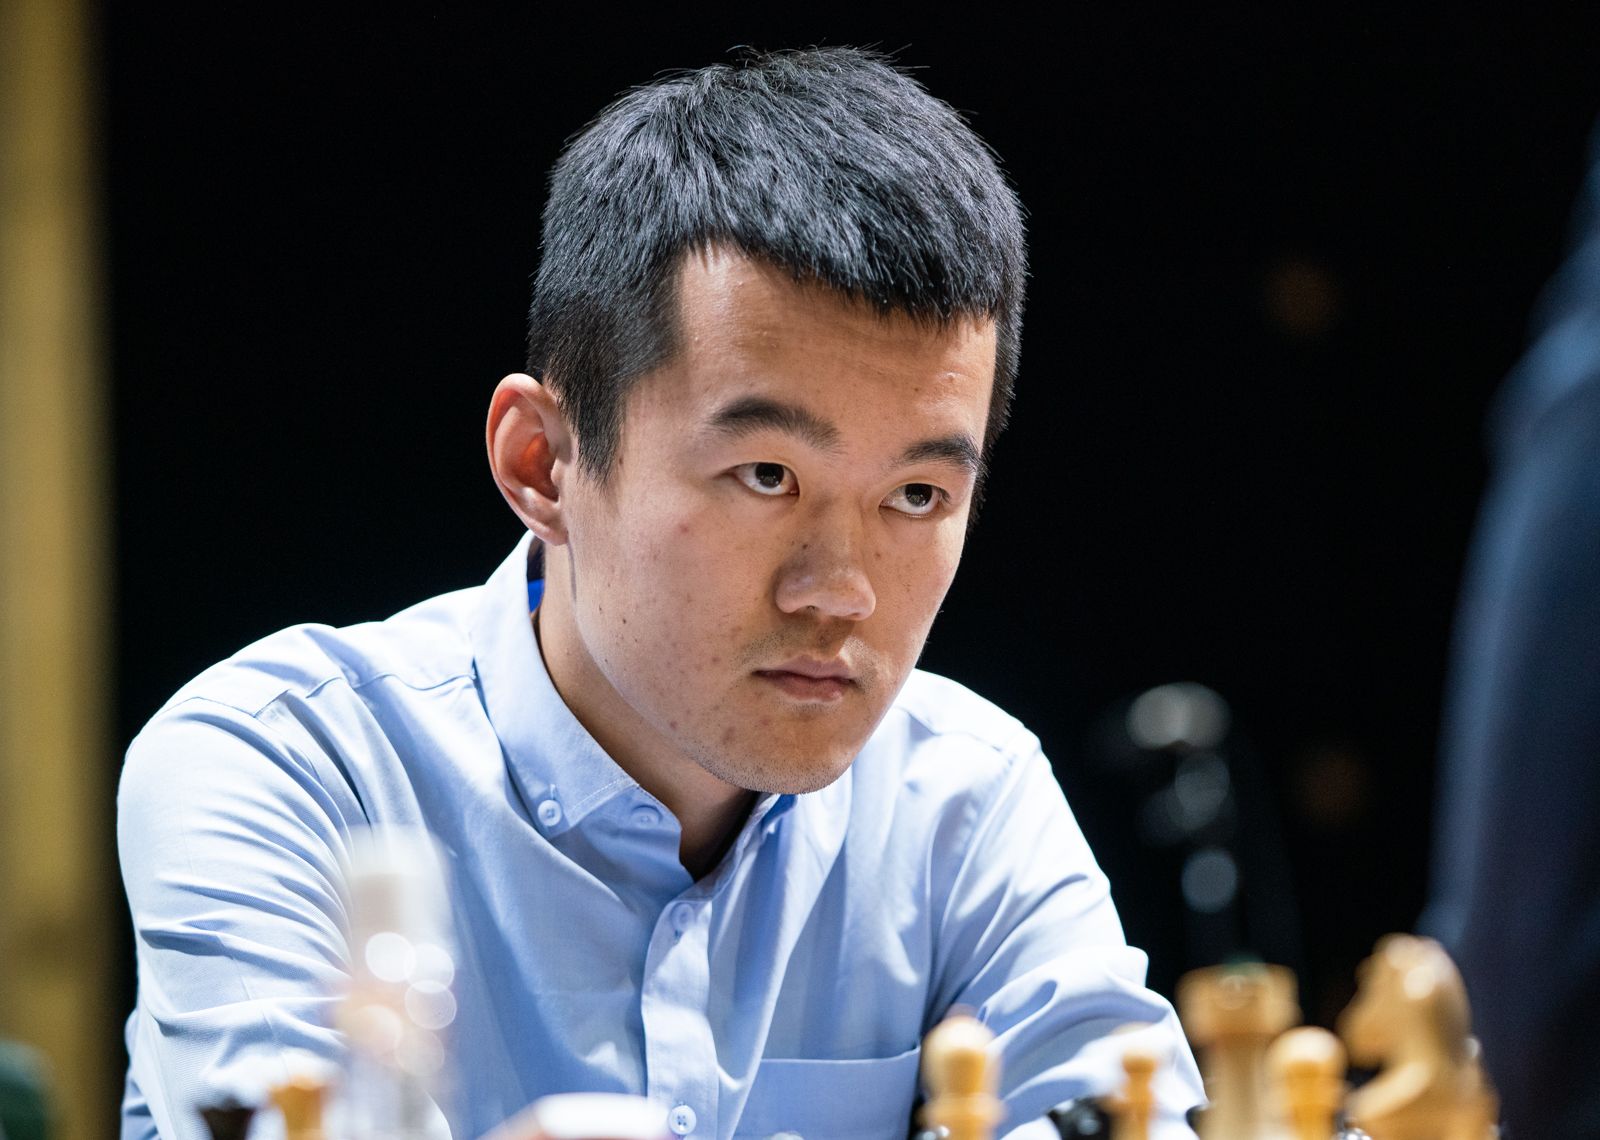 Ding Liren might make it to the Candidates Tournament after all - Dot  Esports